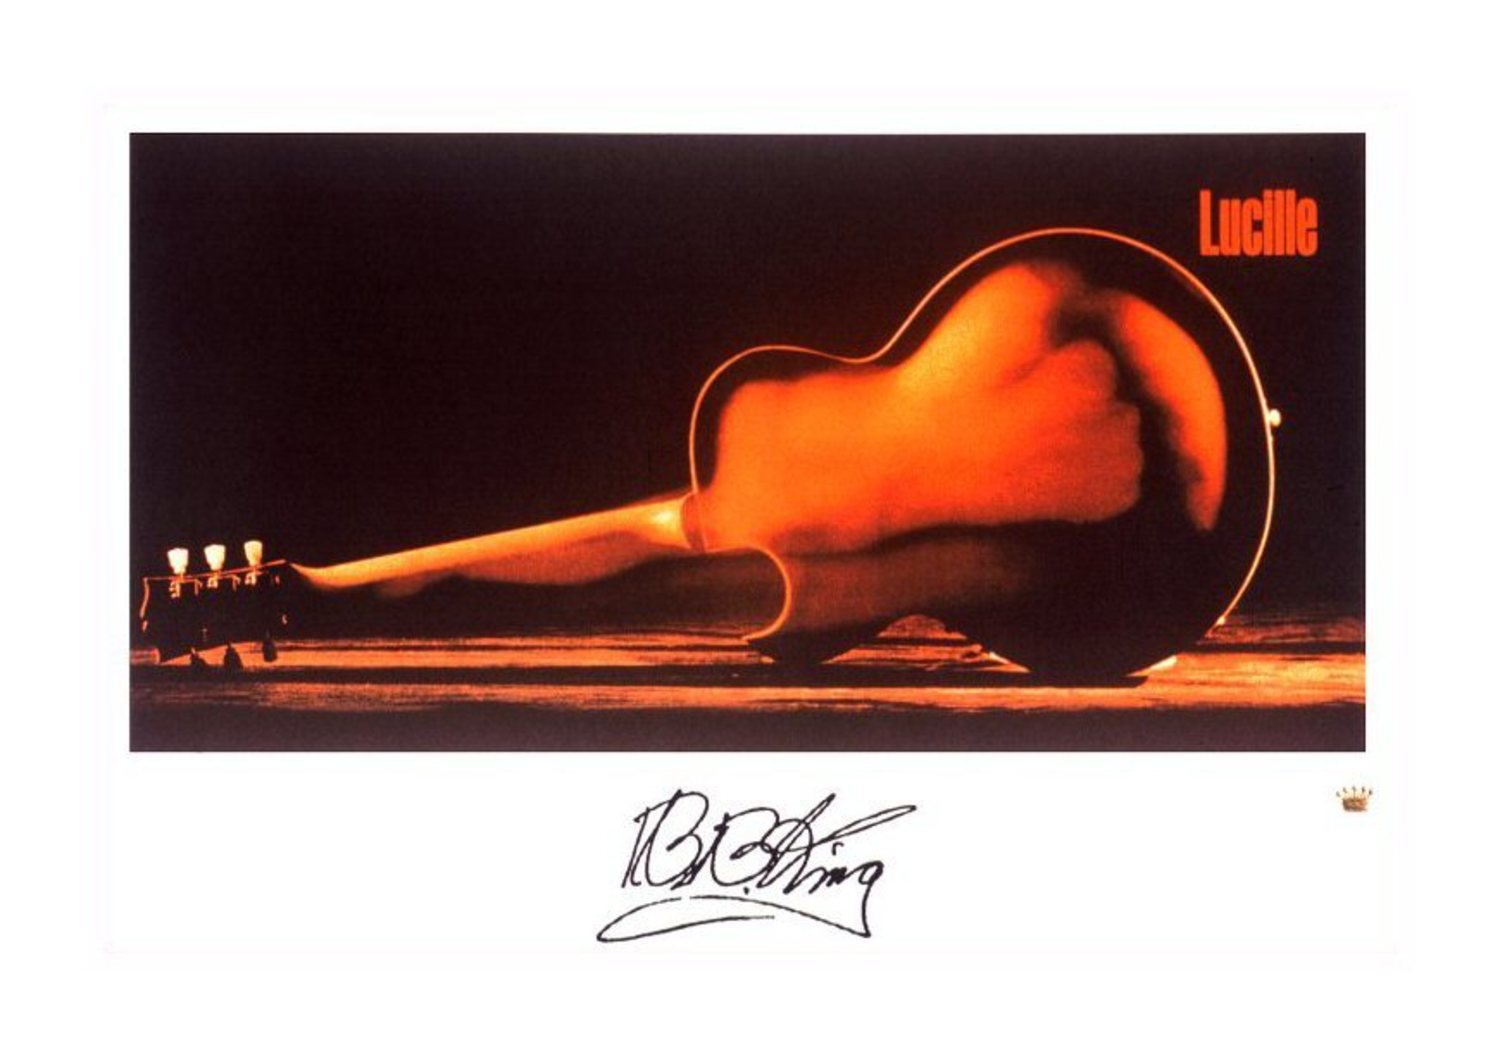 BB KING “LUCILLE GUITAR” LIMITED EDITION FINE ART PRINT – HAND SIGNED BY BB KING